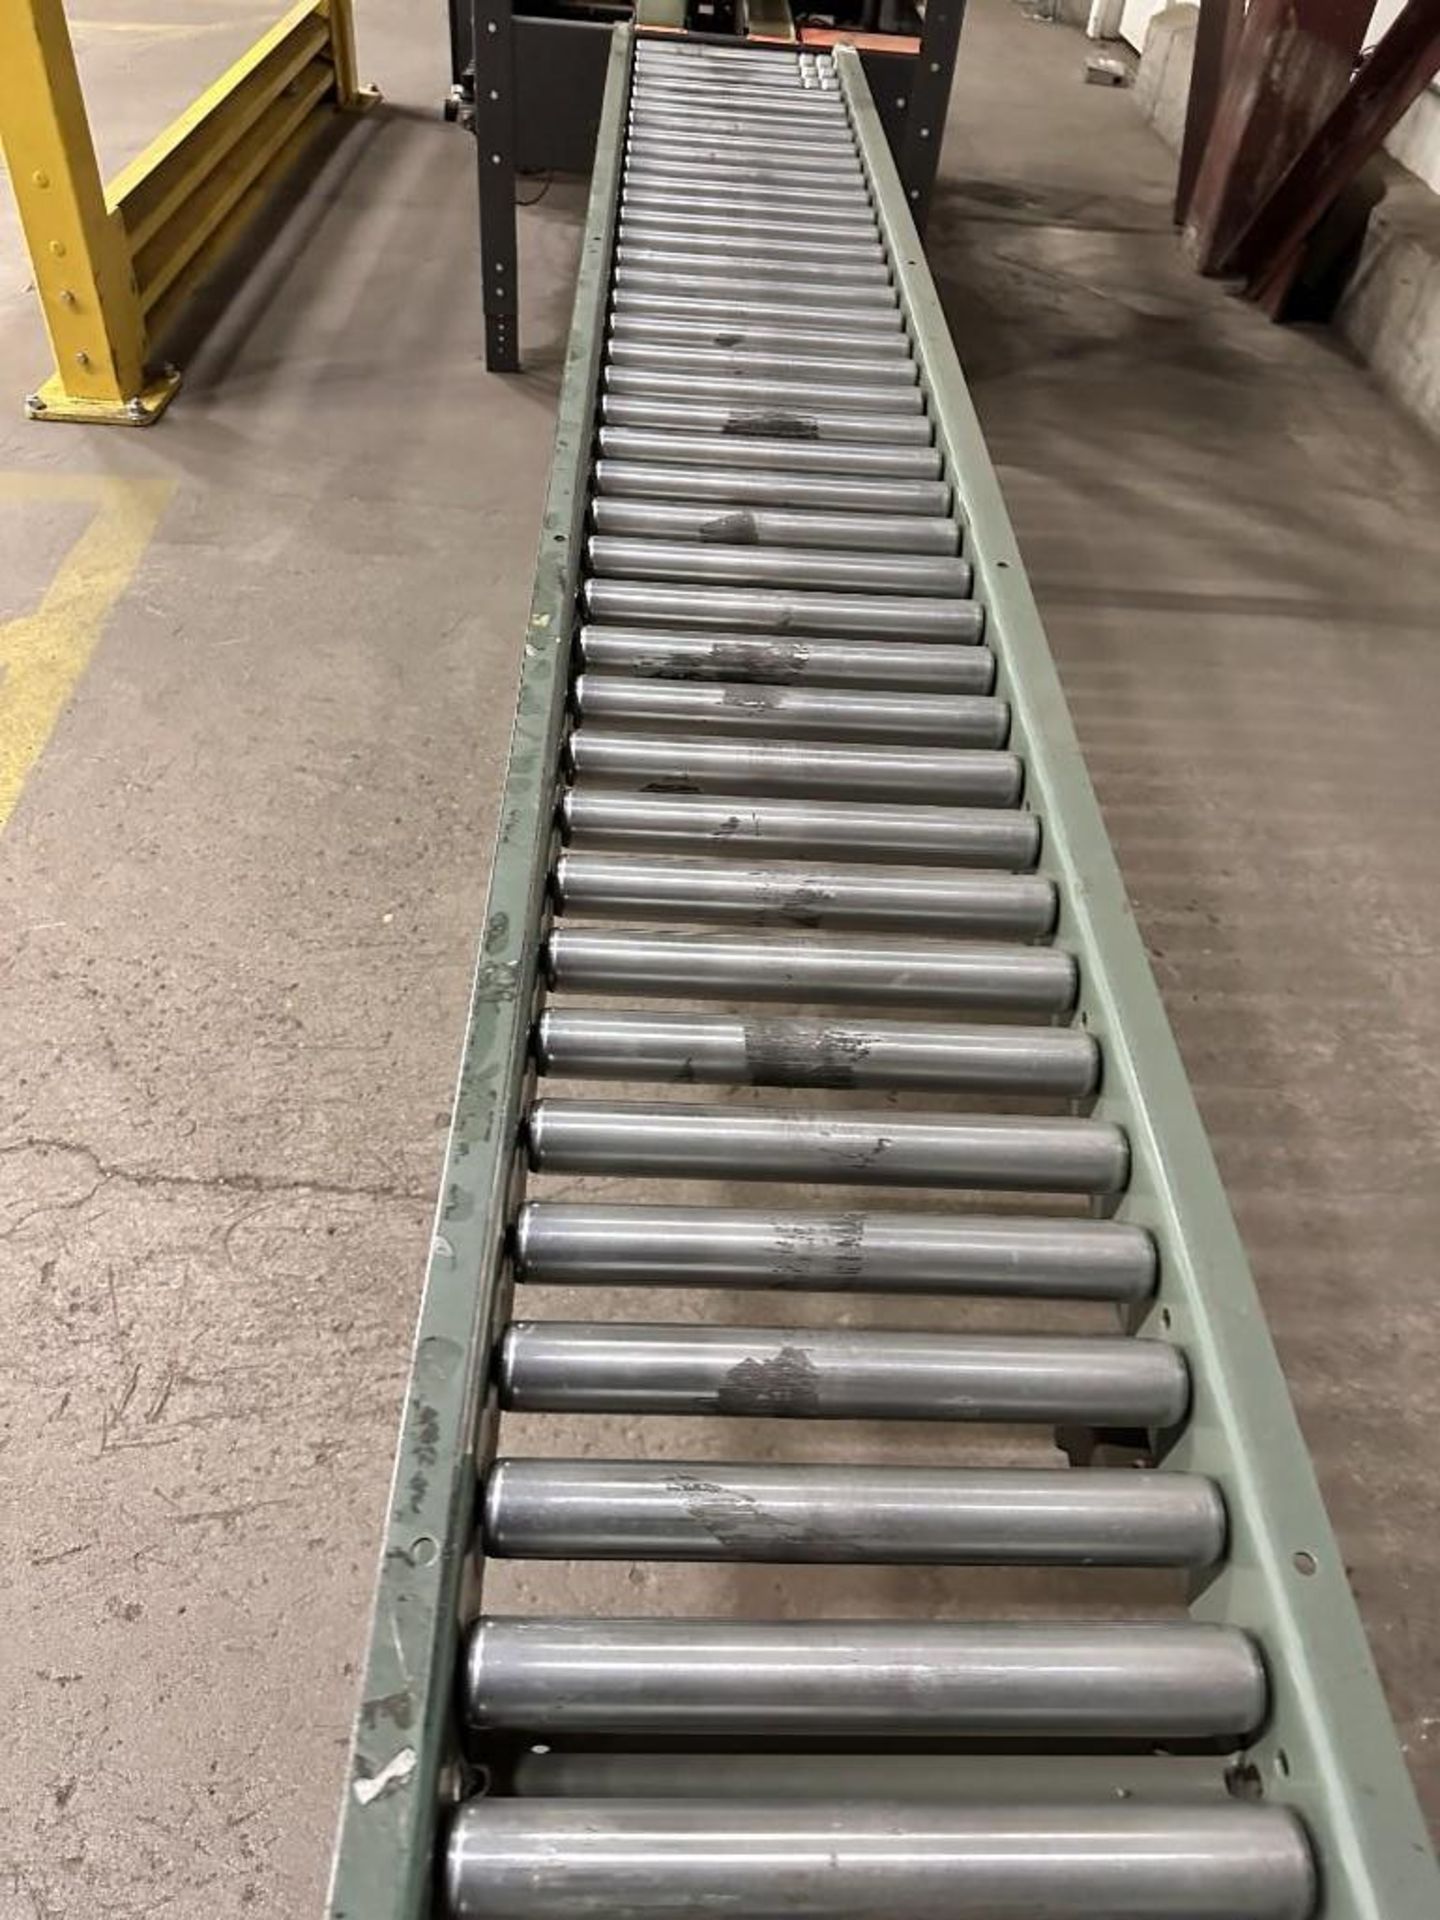 HYTROL POWER CONVEYOR SYSTEM 57 FOOT LONG DRIVEN. WITH BOX SHIFTER - Image 3 of 10